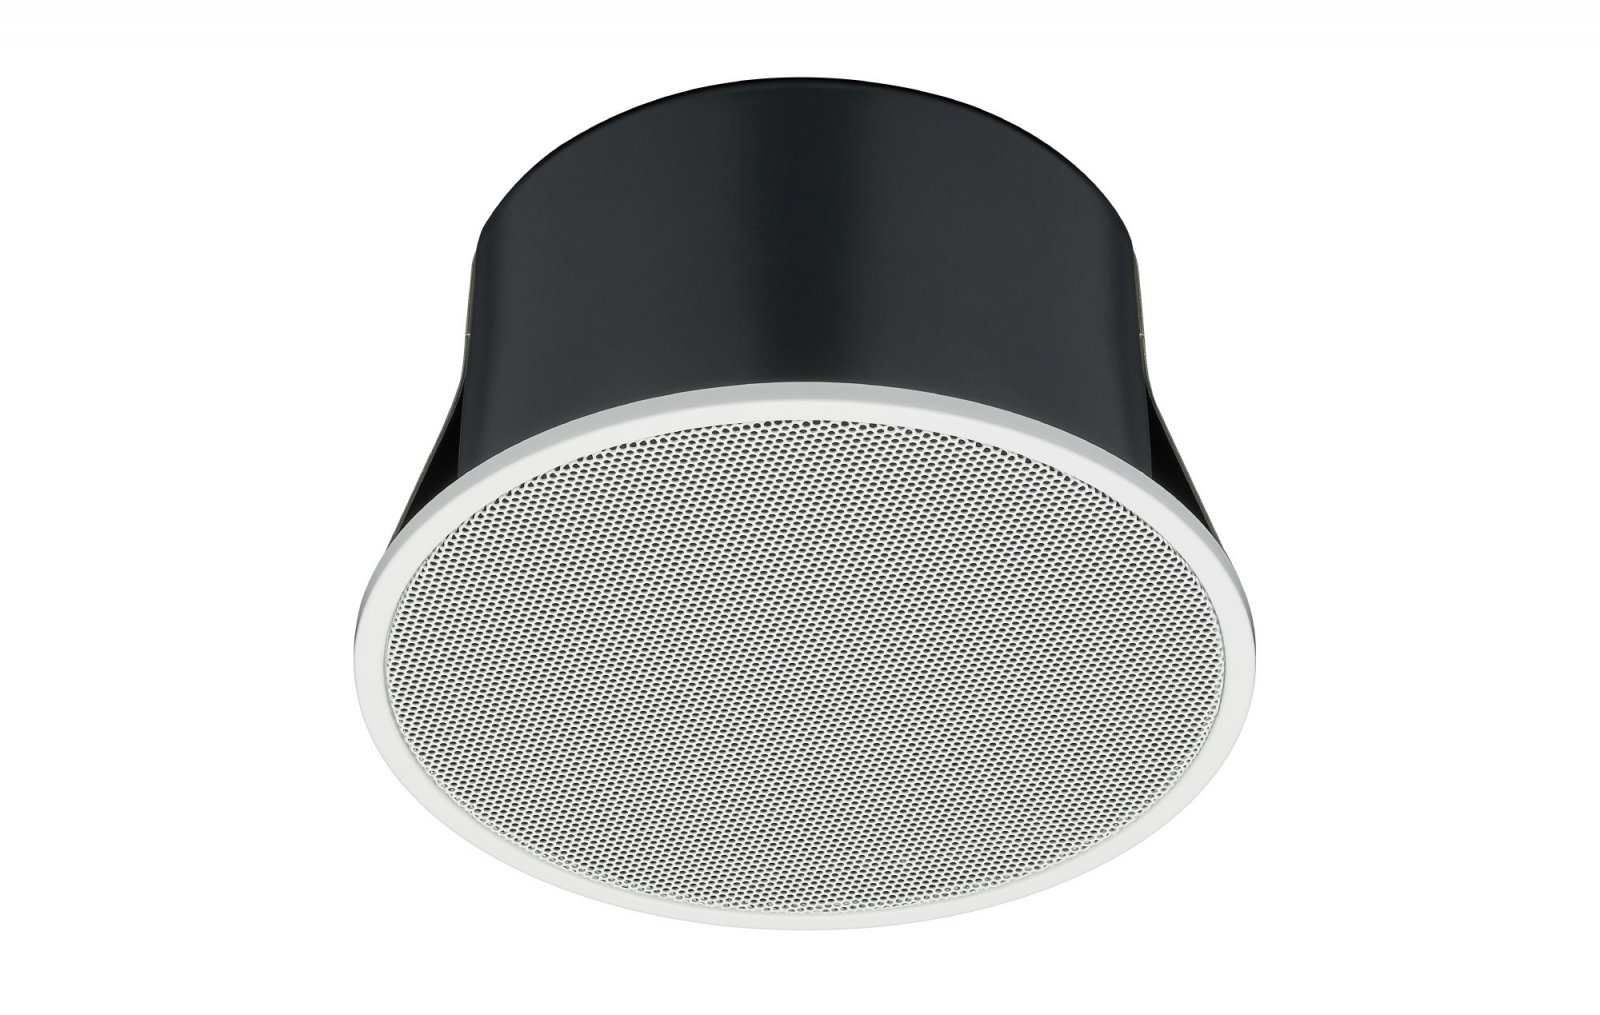 PC-1860F.TOA Ceiling Mount Fire Dome Speaker